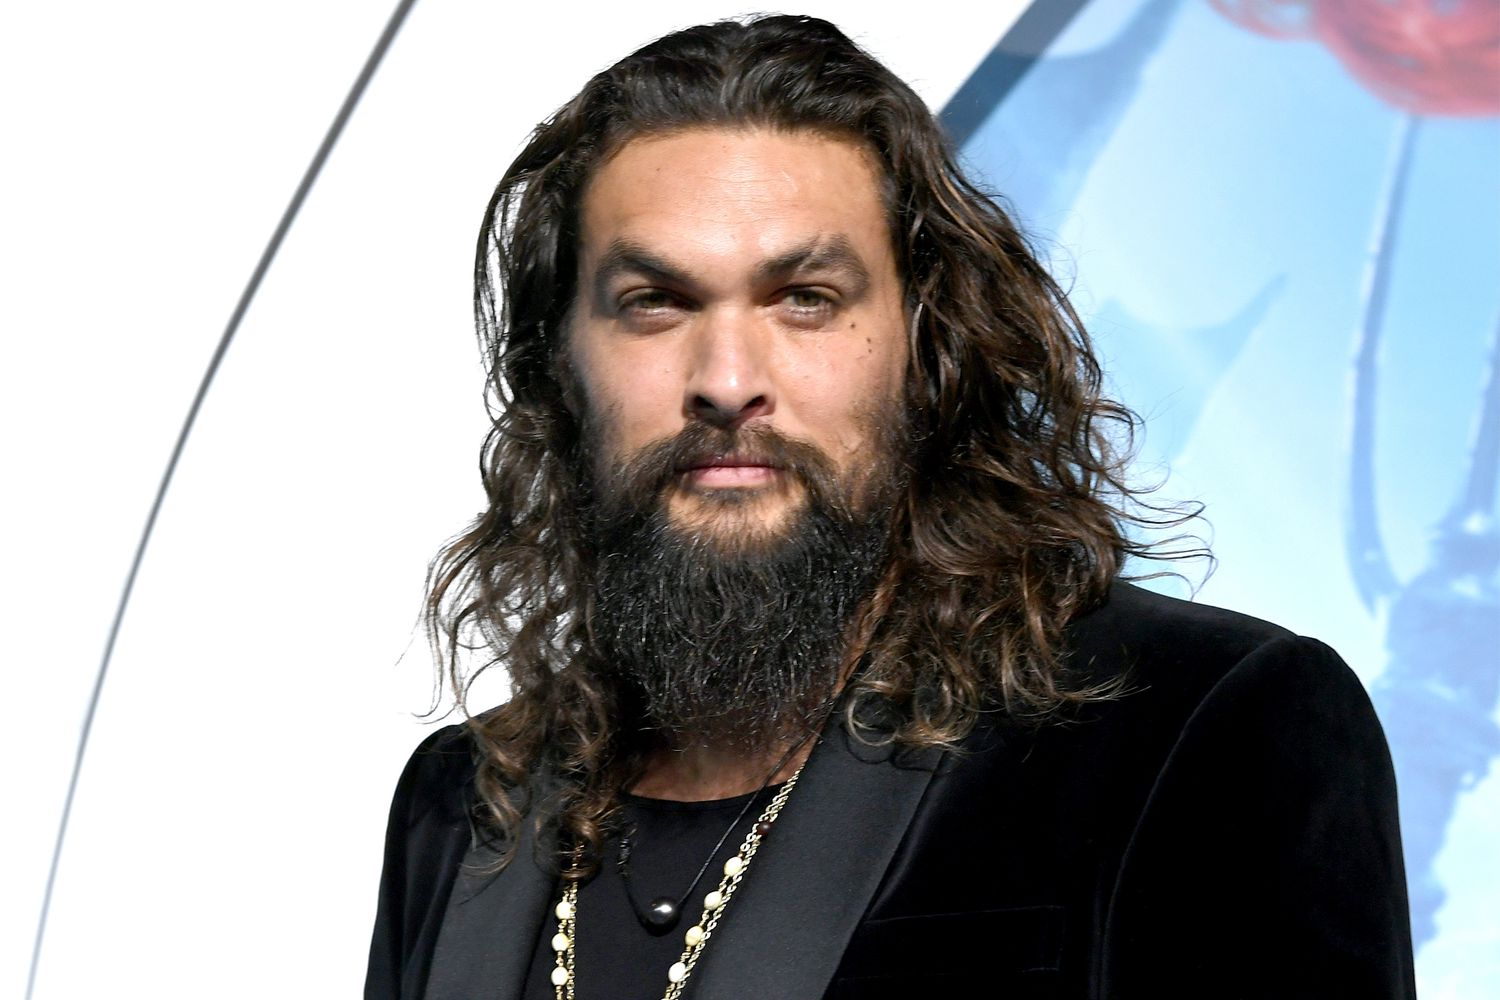 Jason Momoa says he was starving, in debt after Game of Thrones 